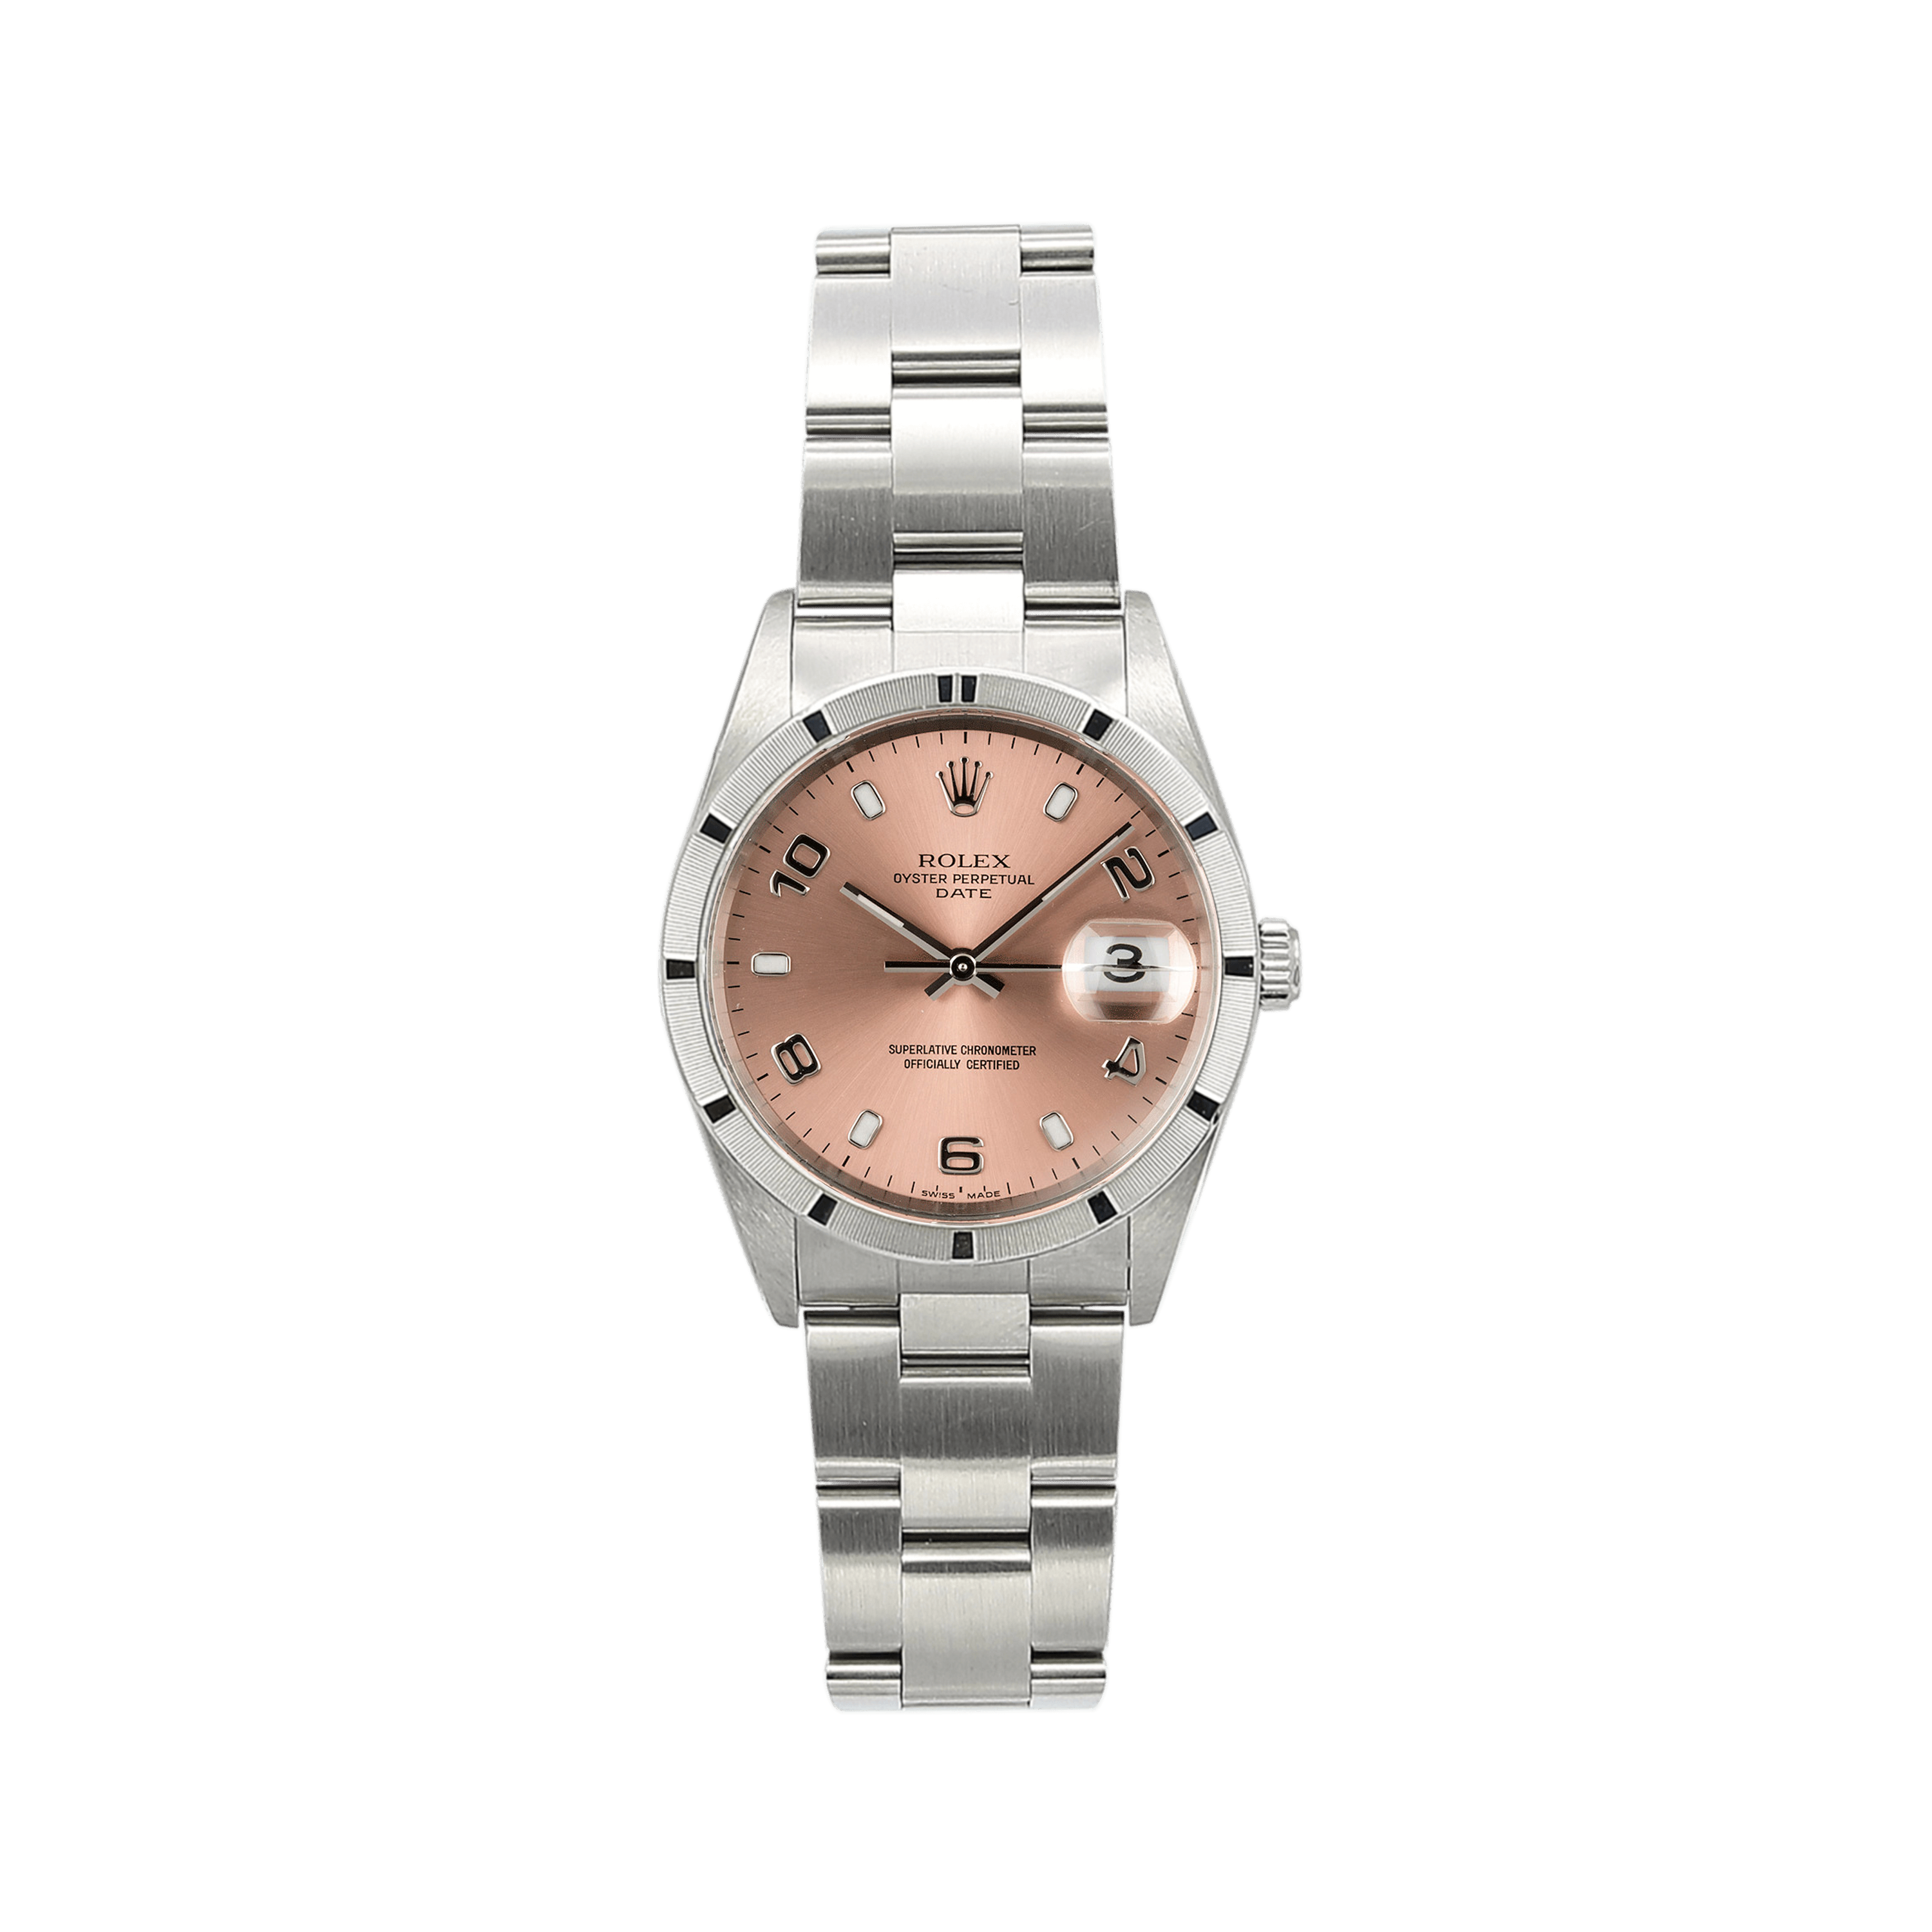 Rolex Date ref. 15210 - Salmon Arabic Dial - With Papers